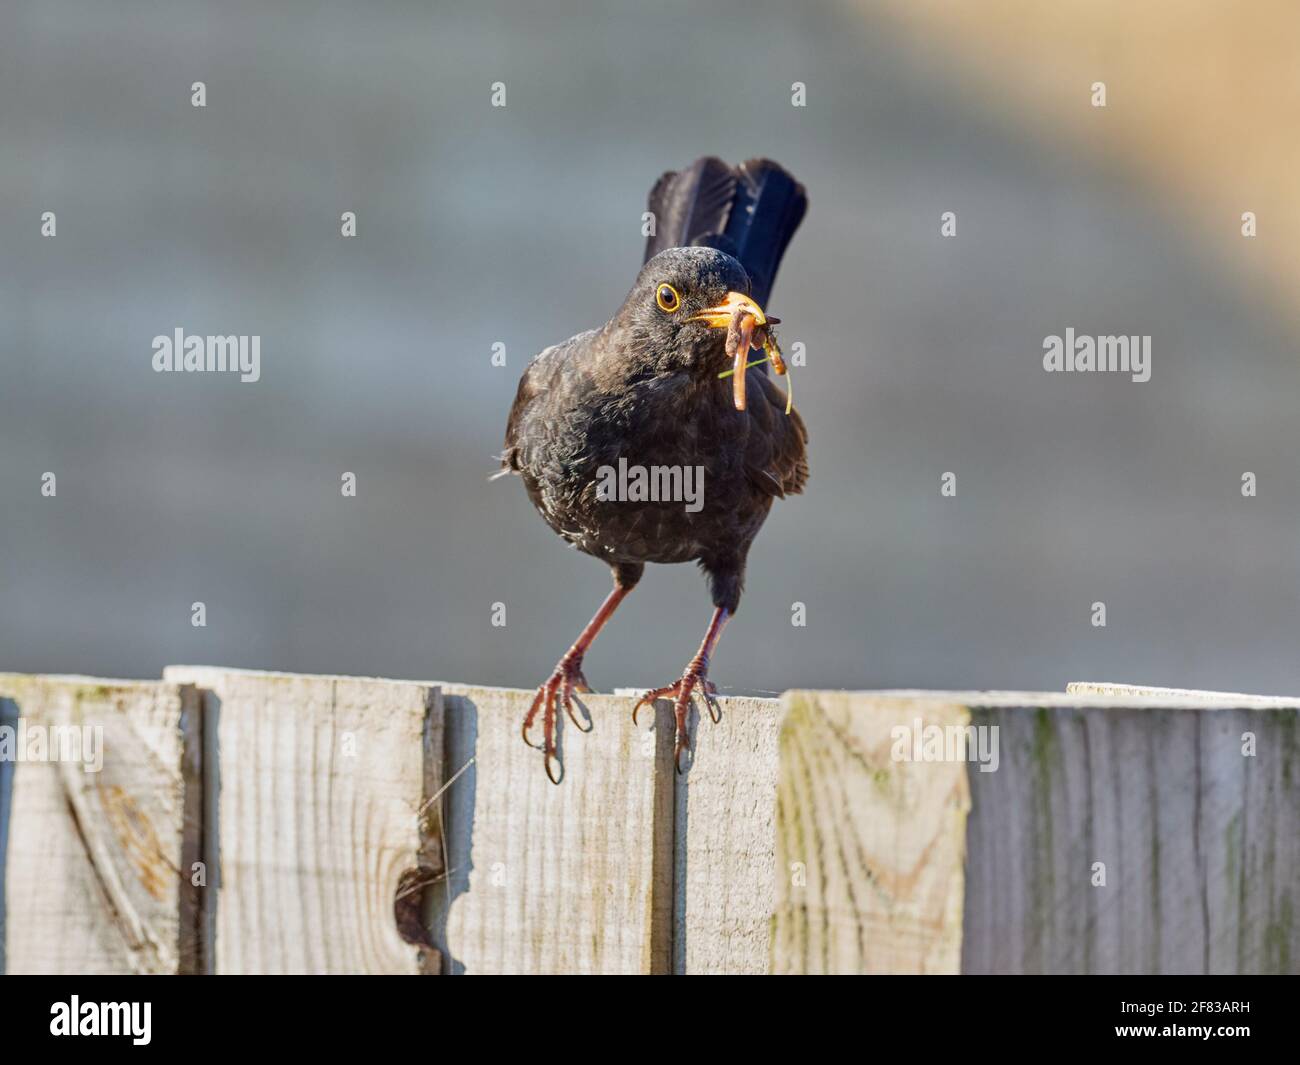 Male Blackbird, Turdus Merula, perched on a garden fence with its beak full of worms Stock Photo